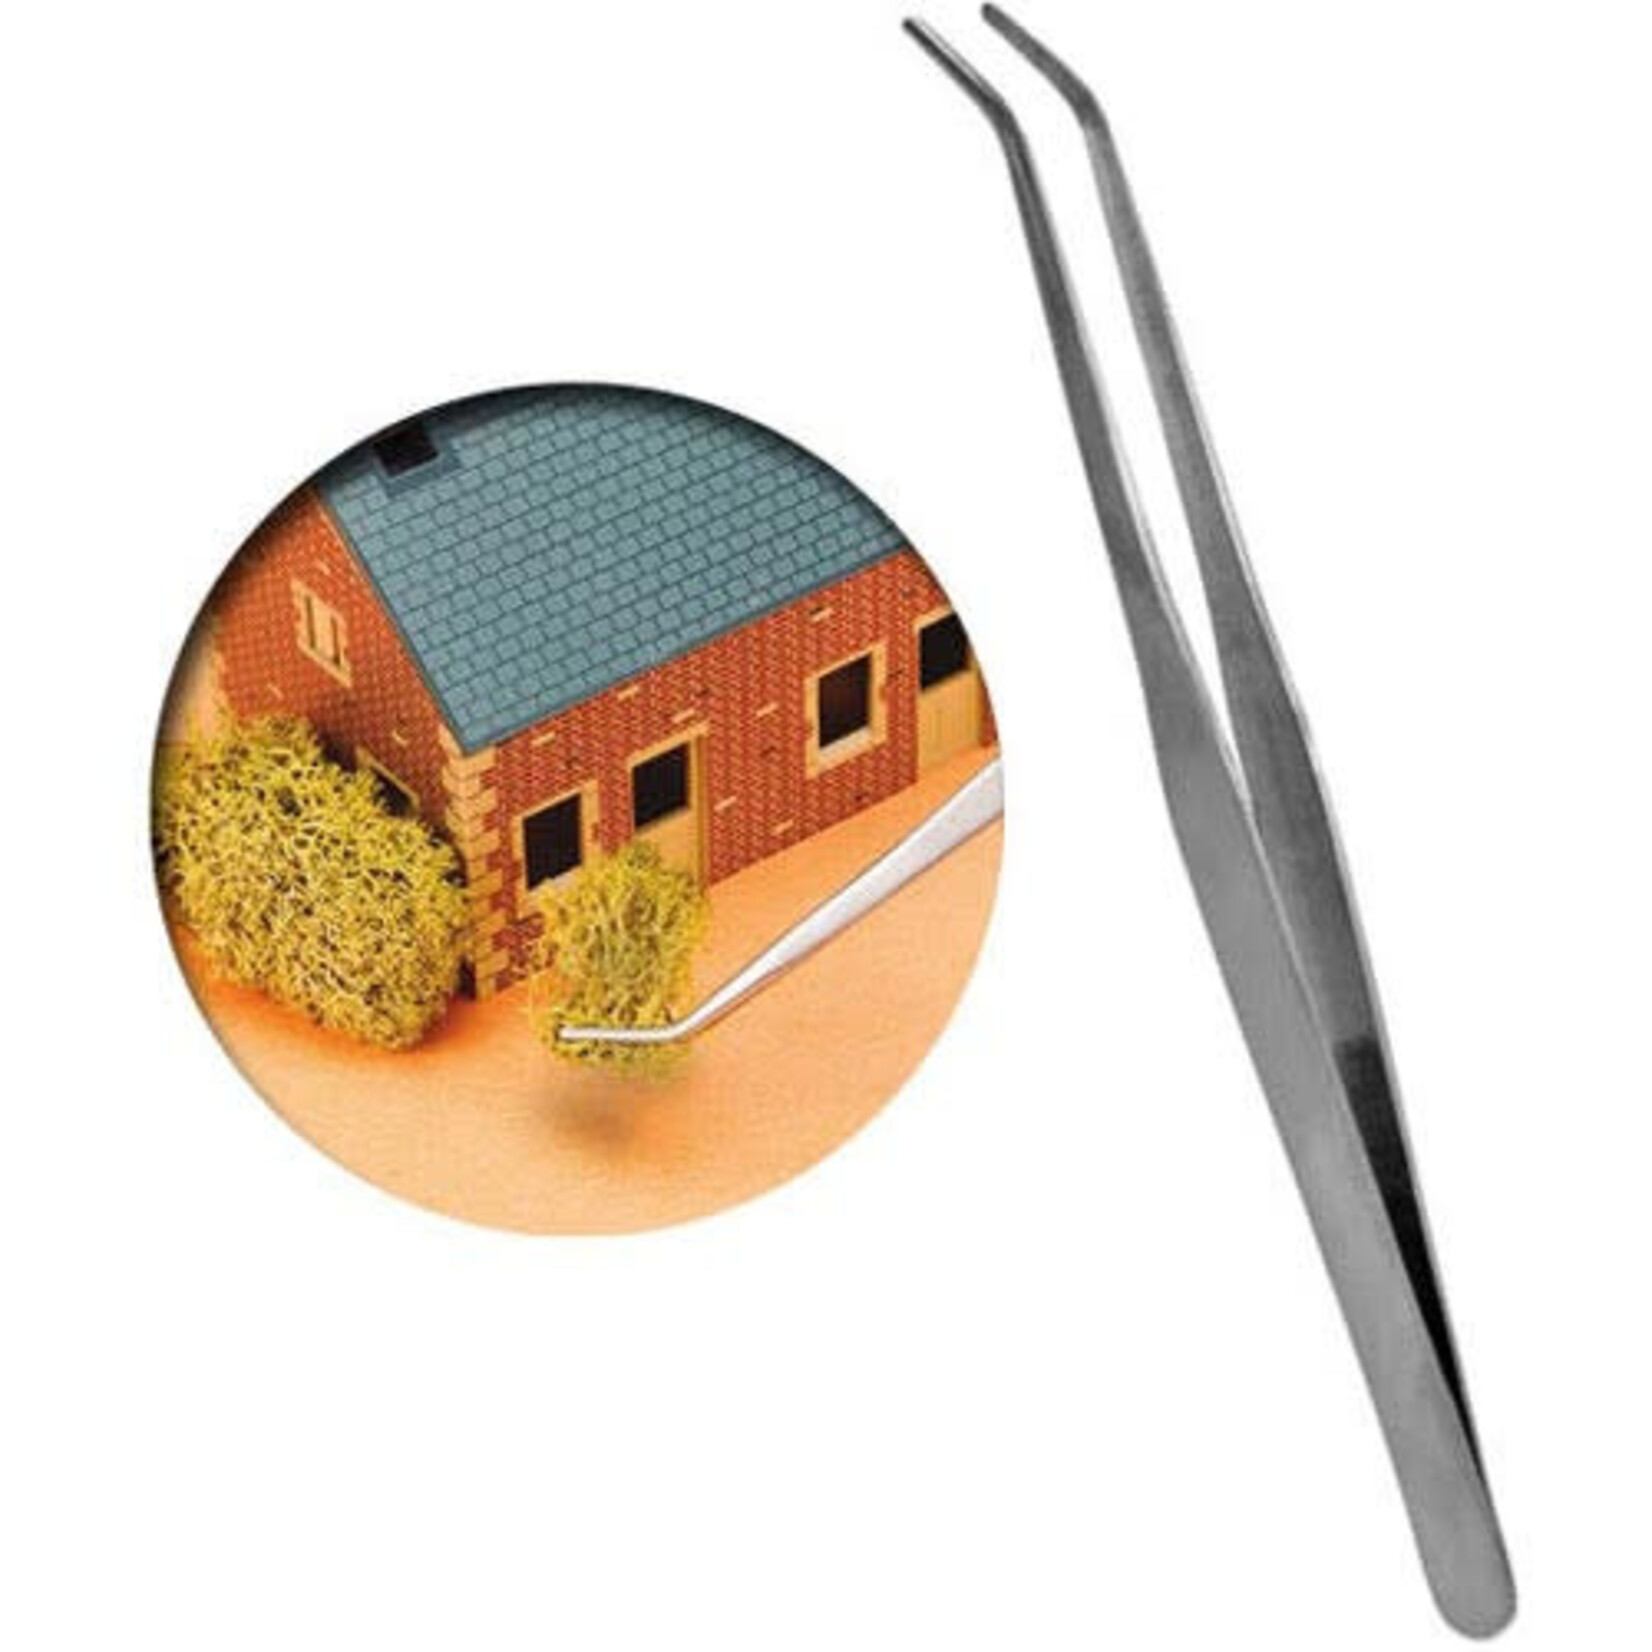 Vallejo Tool: Strong Curved Stainless Steel Tweezers (175mm)